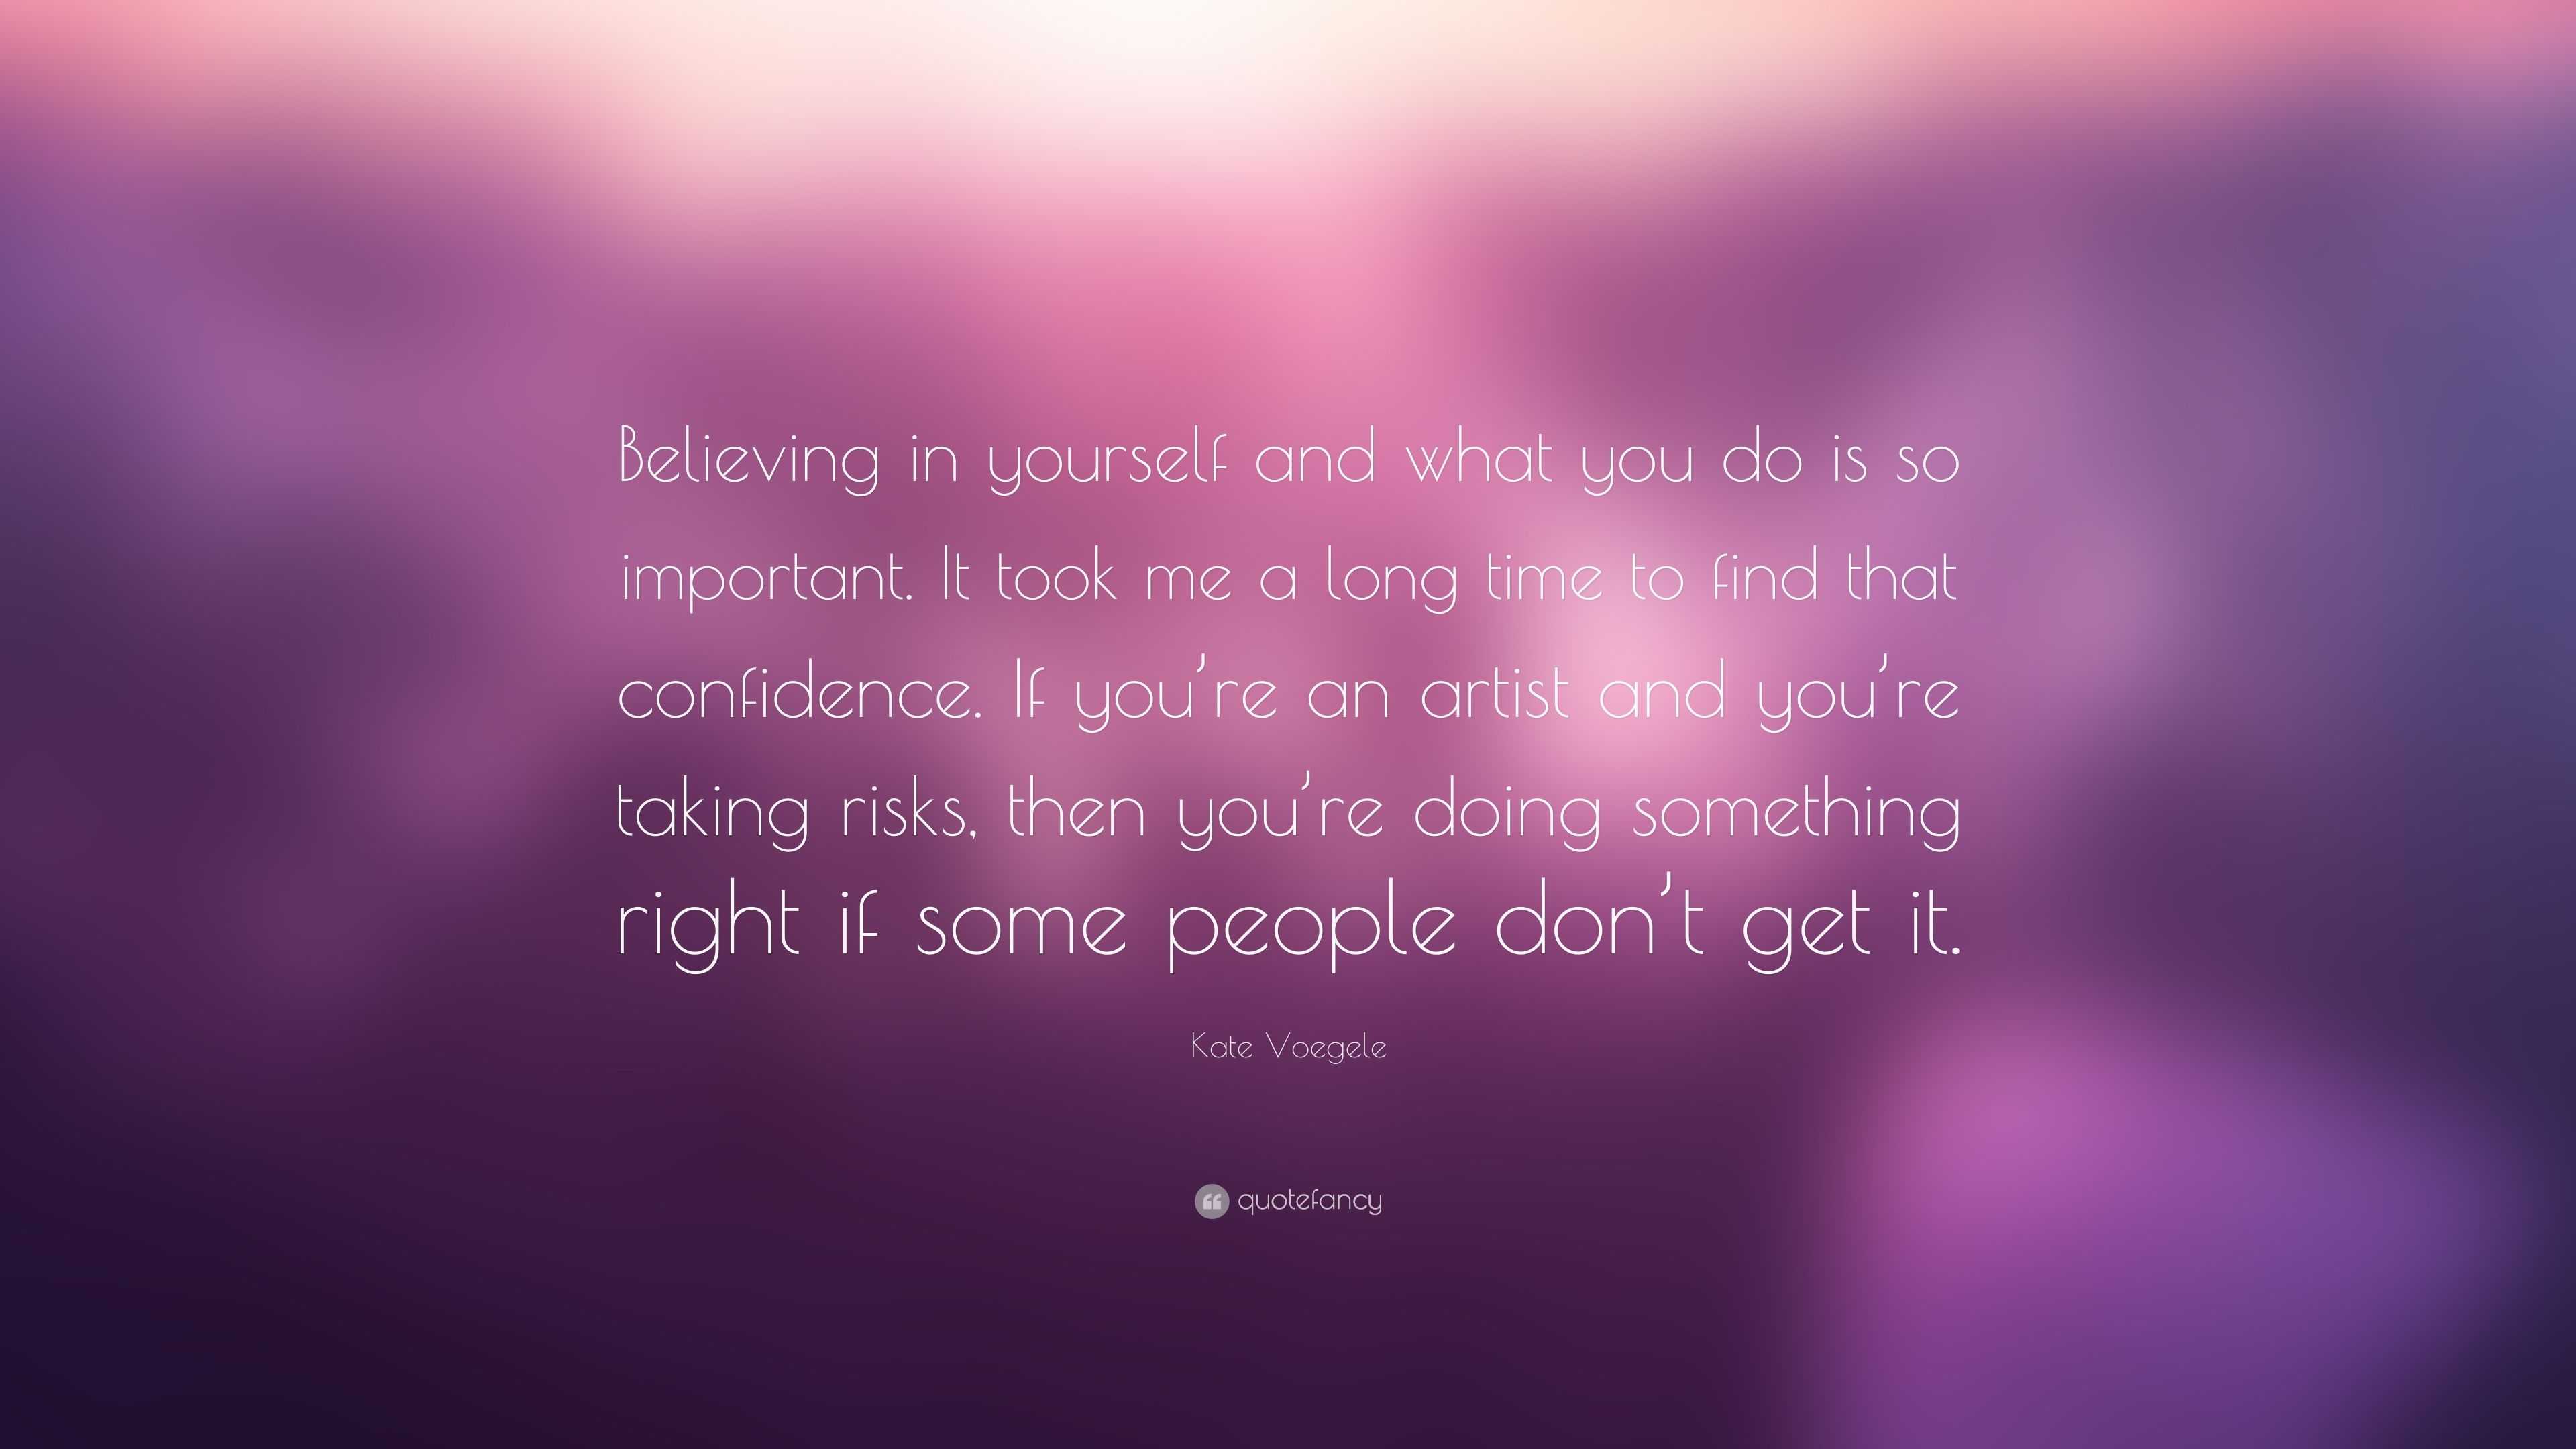 Kate Voegele Quote: “Believing in yourself and what you do is so ...